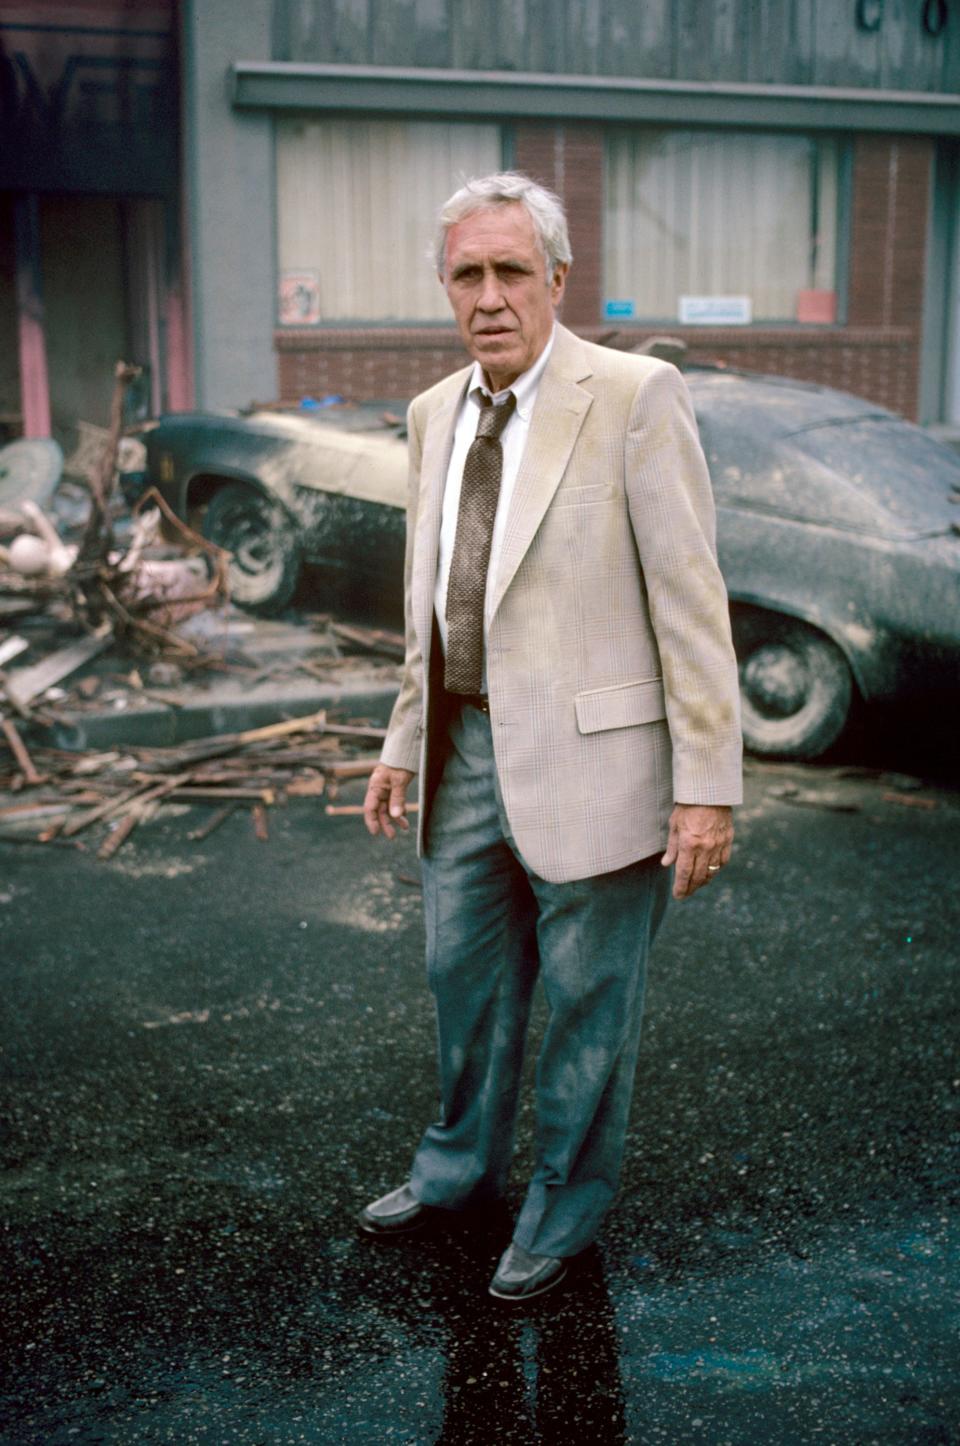 "The Day After," ABC's graphic, disturbing film about the effects of a devastating nuclear holocaust on small-town residents of eastern Kansas, starred Jason Robards as Dr. Russell Oakes.